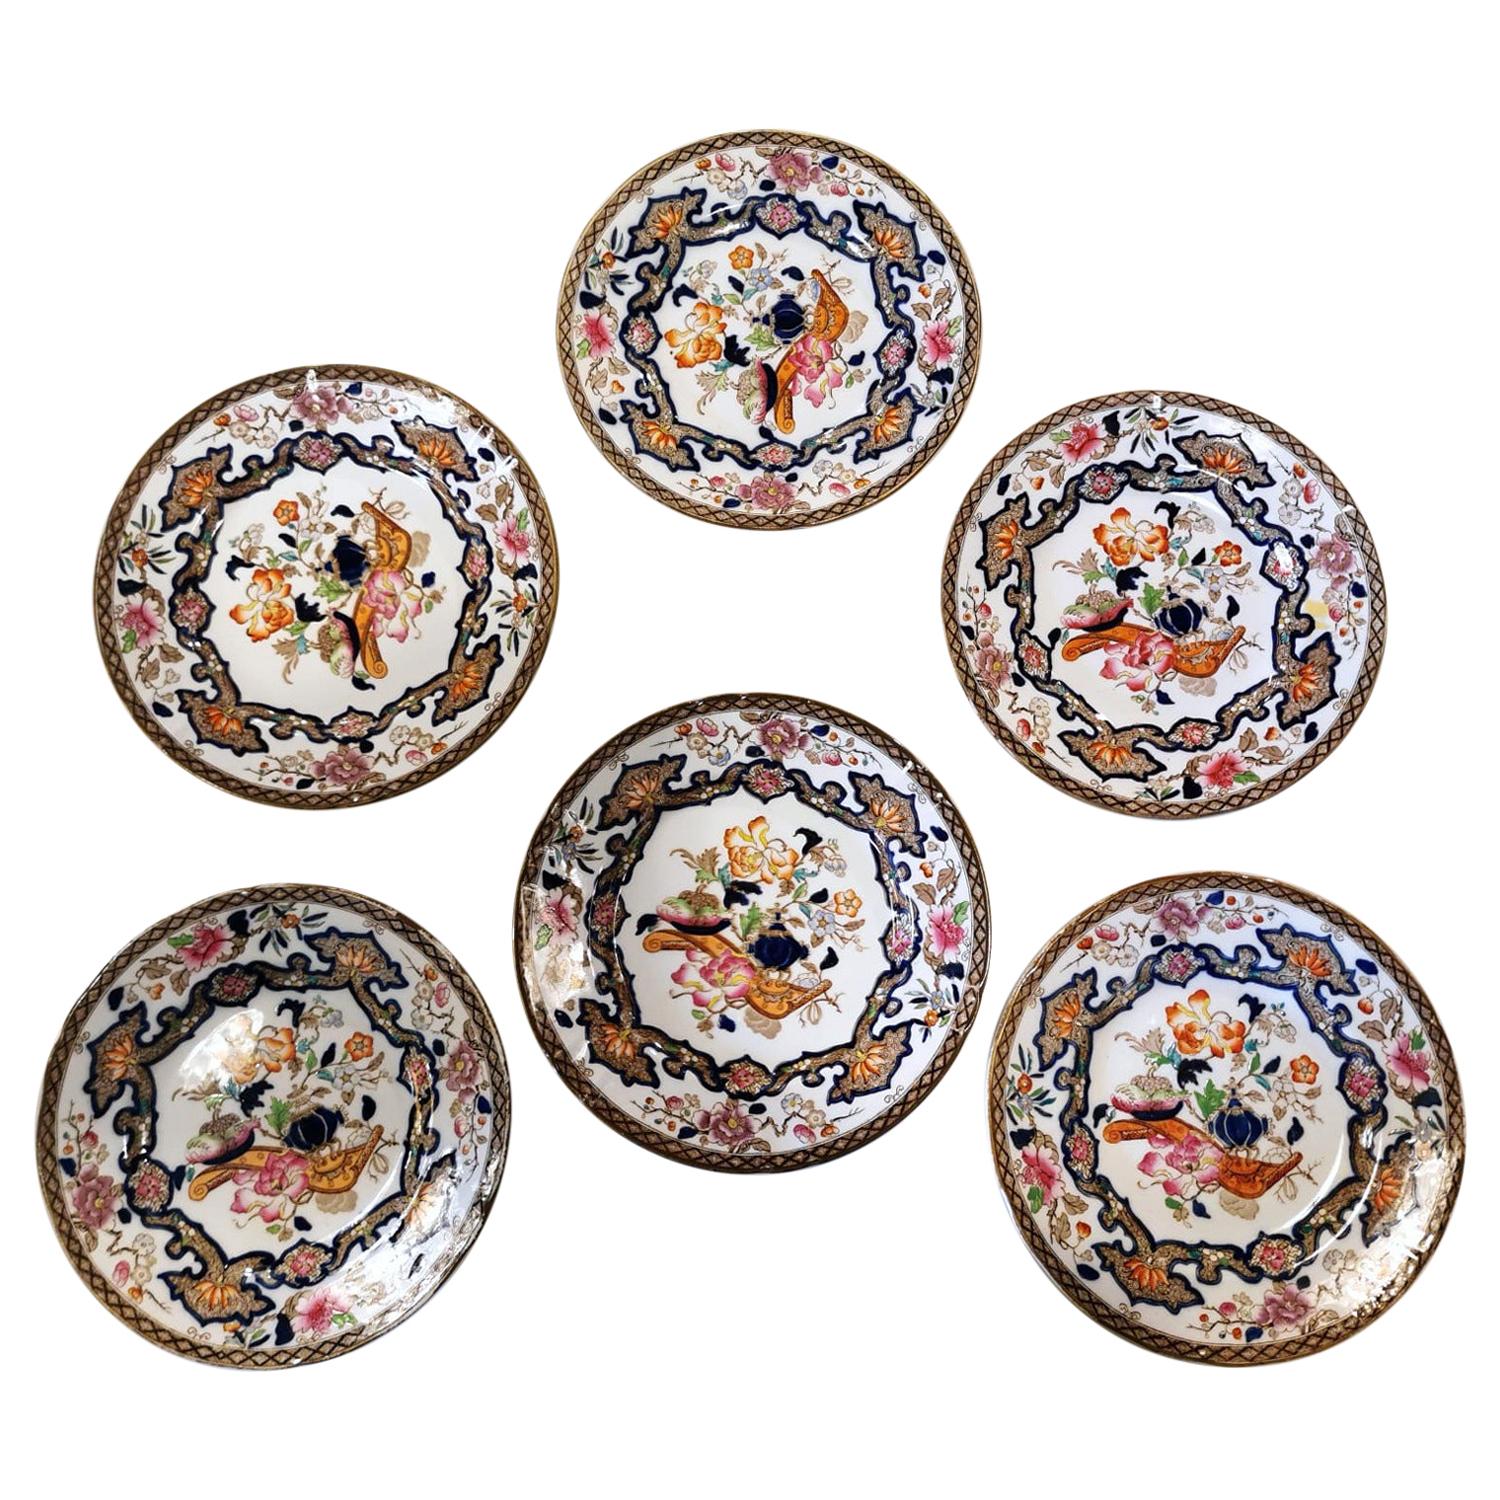 Mintons Six English Porcelain Saucers with "Chinoserie" Design